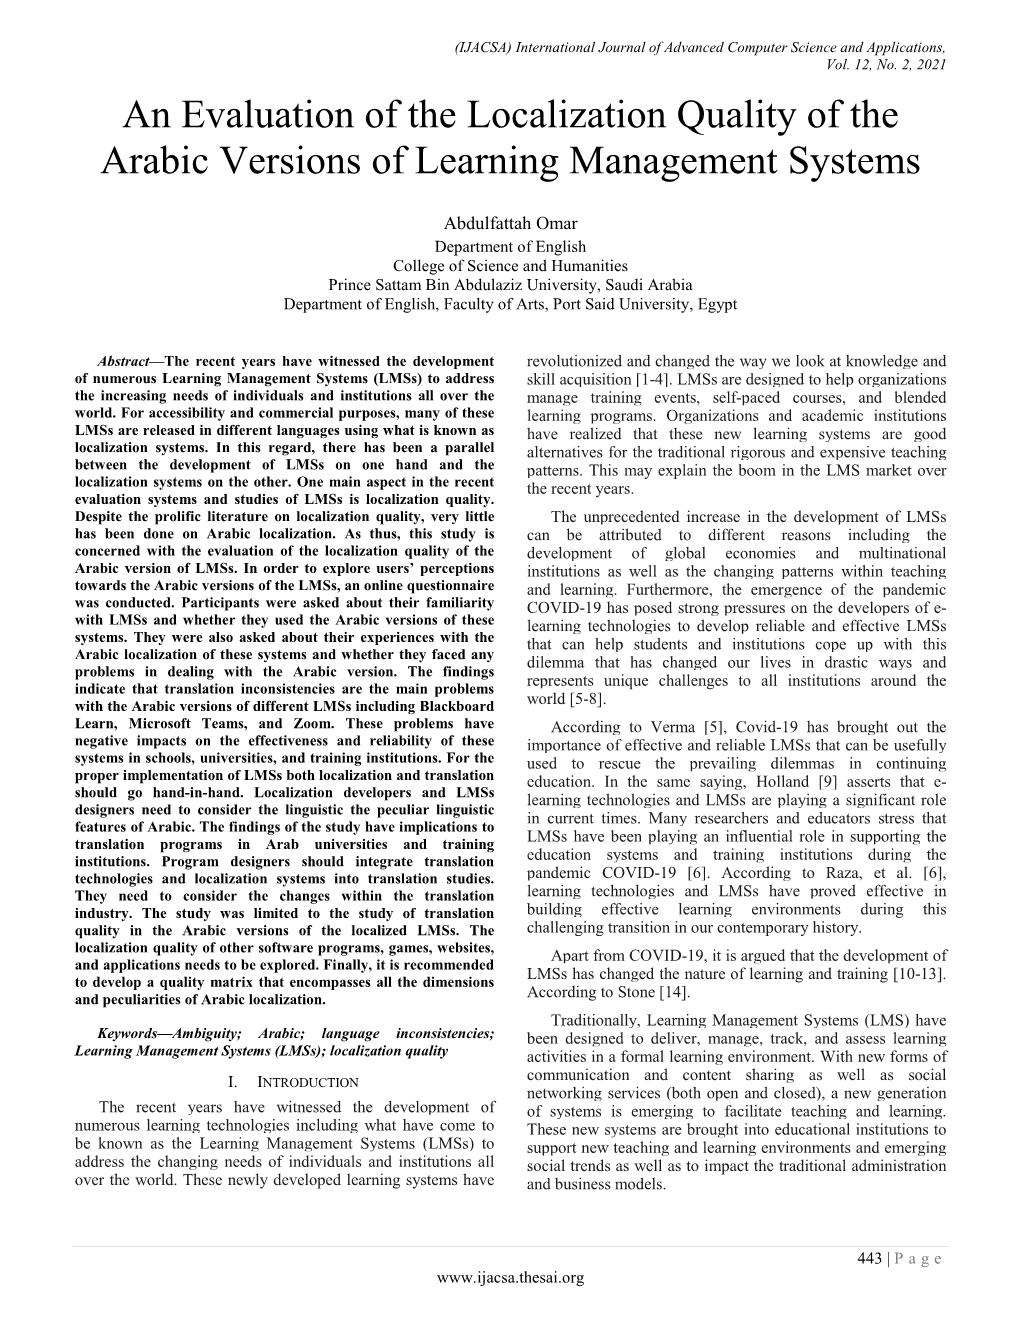 An Evaluation of the Localization Quality of the Arabic Versions of Learning Management Systems